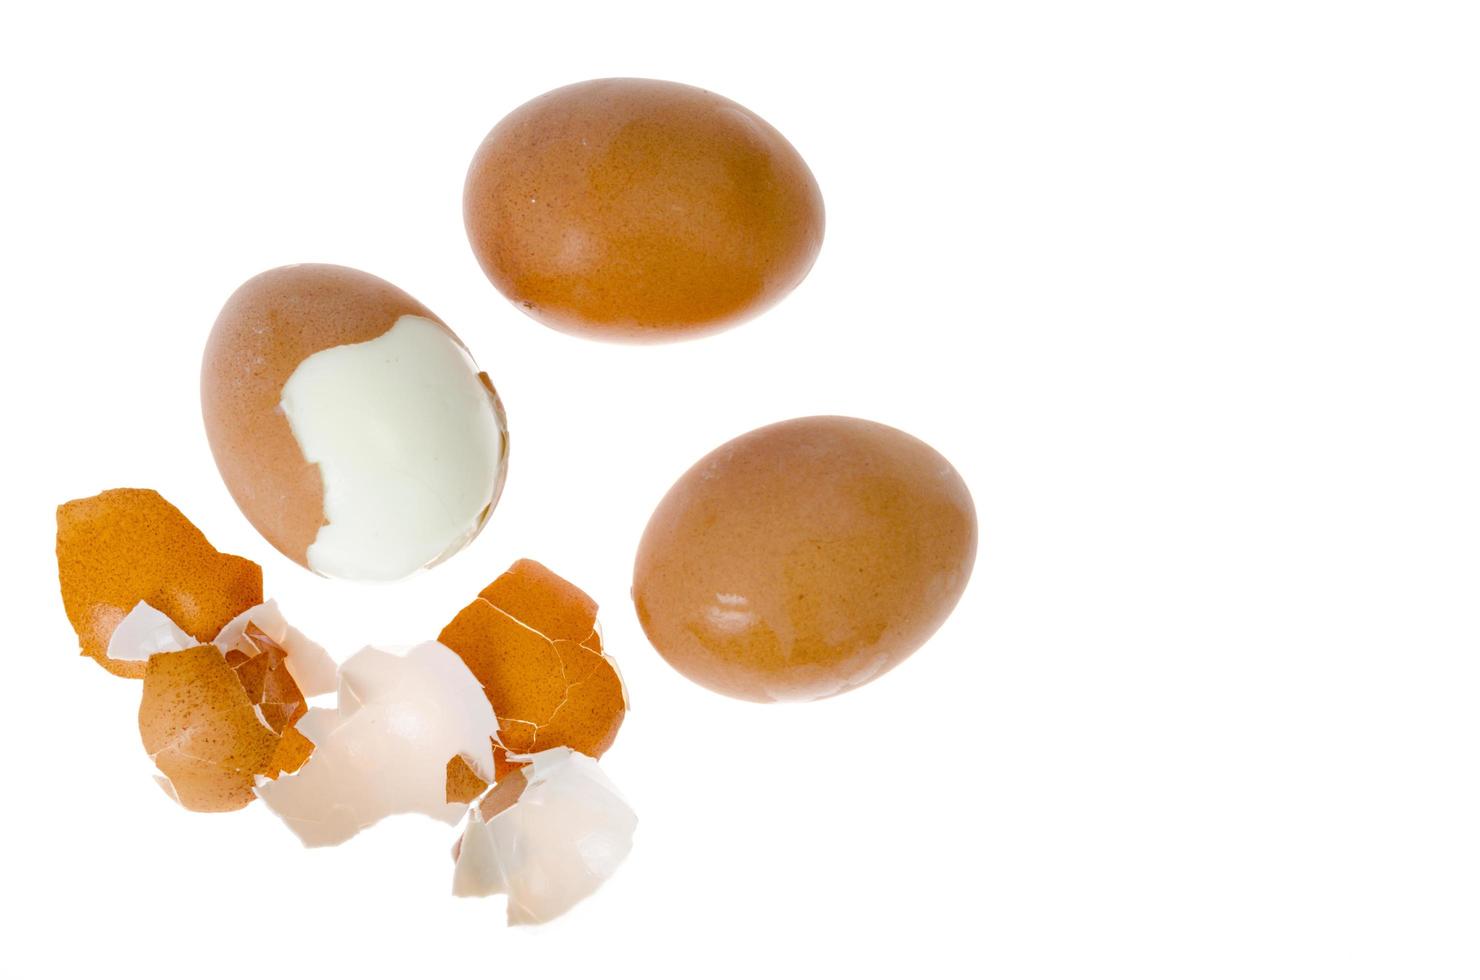 Boiled chicken eggs with colored shells on white background. photo